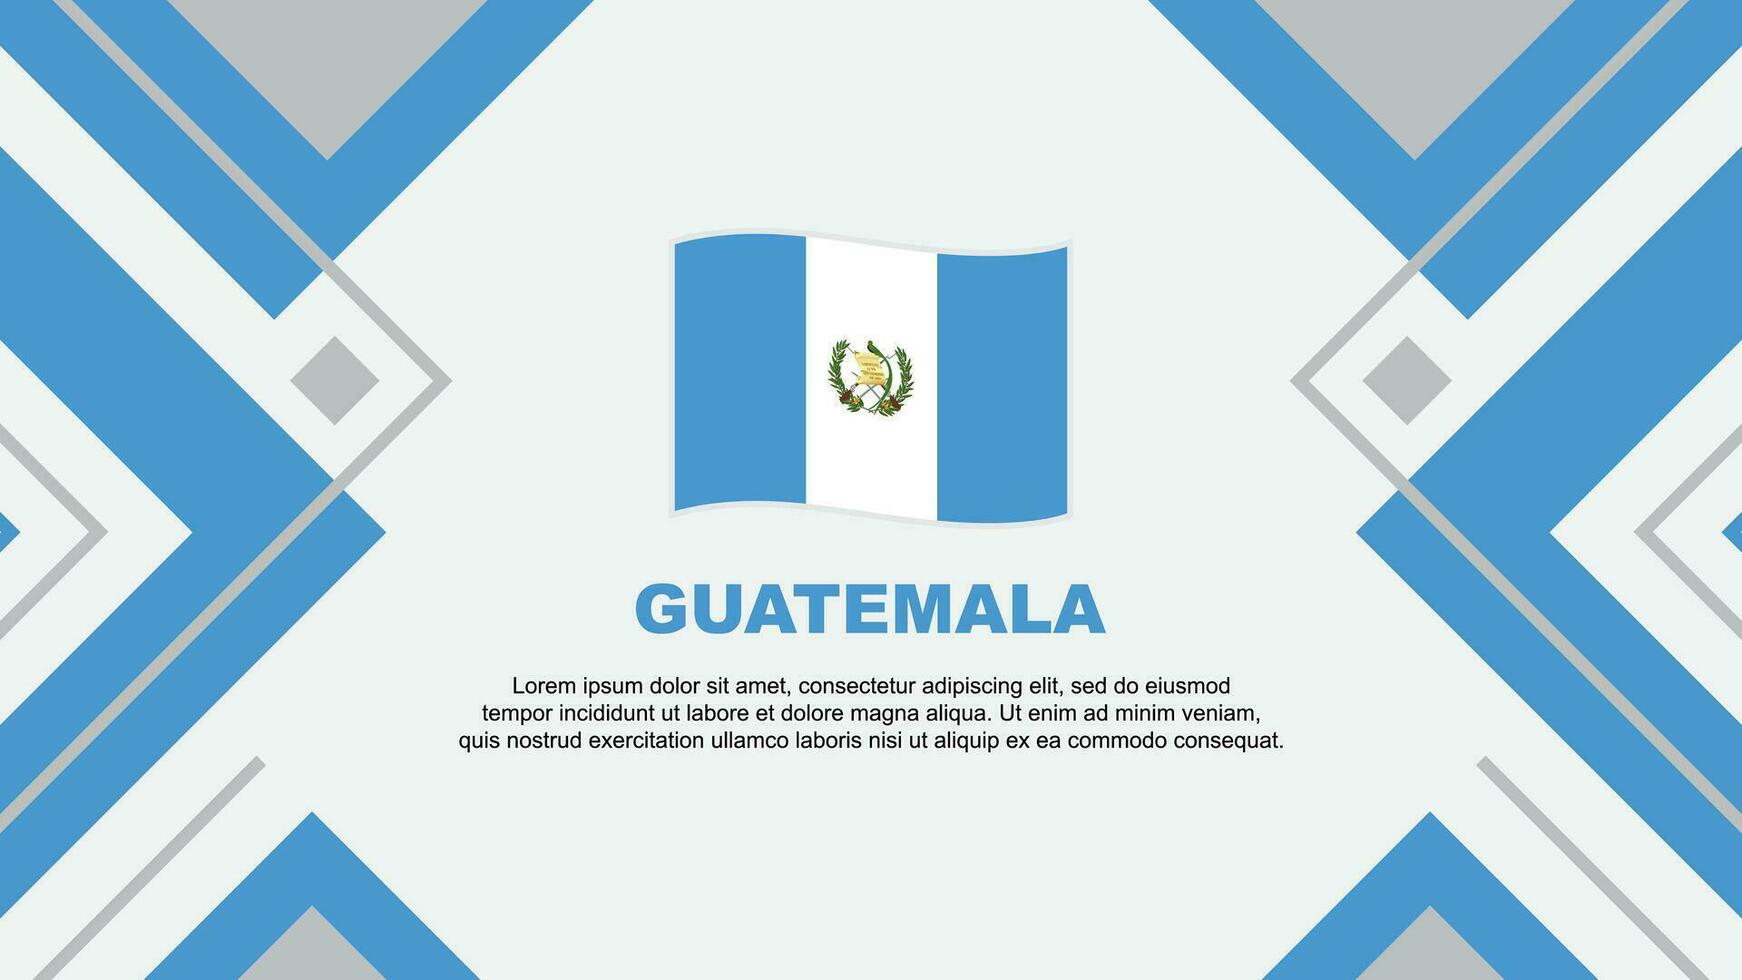 Guatemala Flag Abstract Background Design Template. Guatemala Independence Day Banner Wallpaper Vector Illustration. Guatemala Illustration